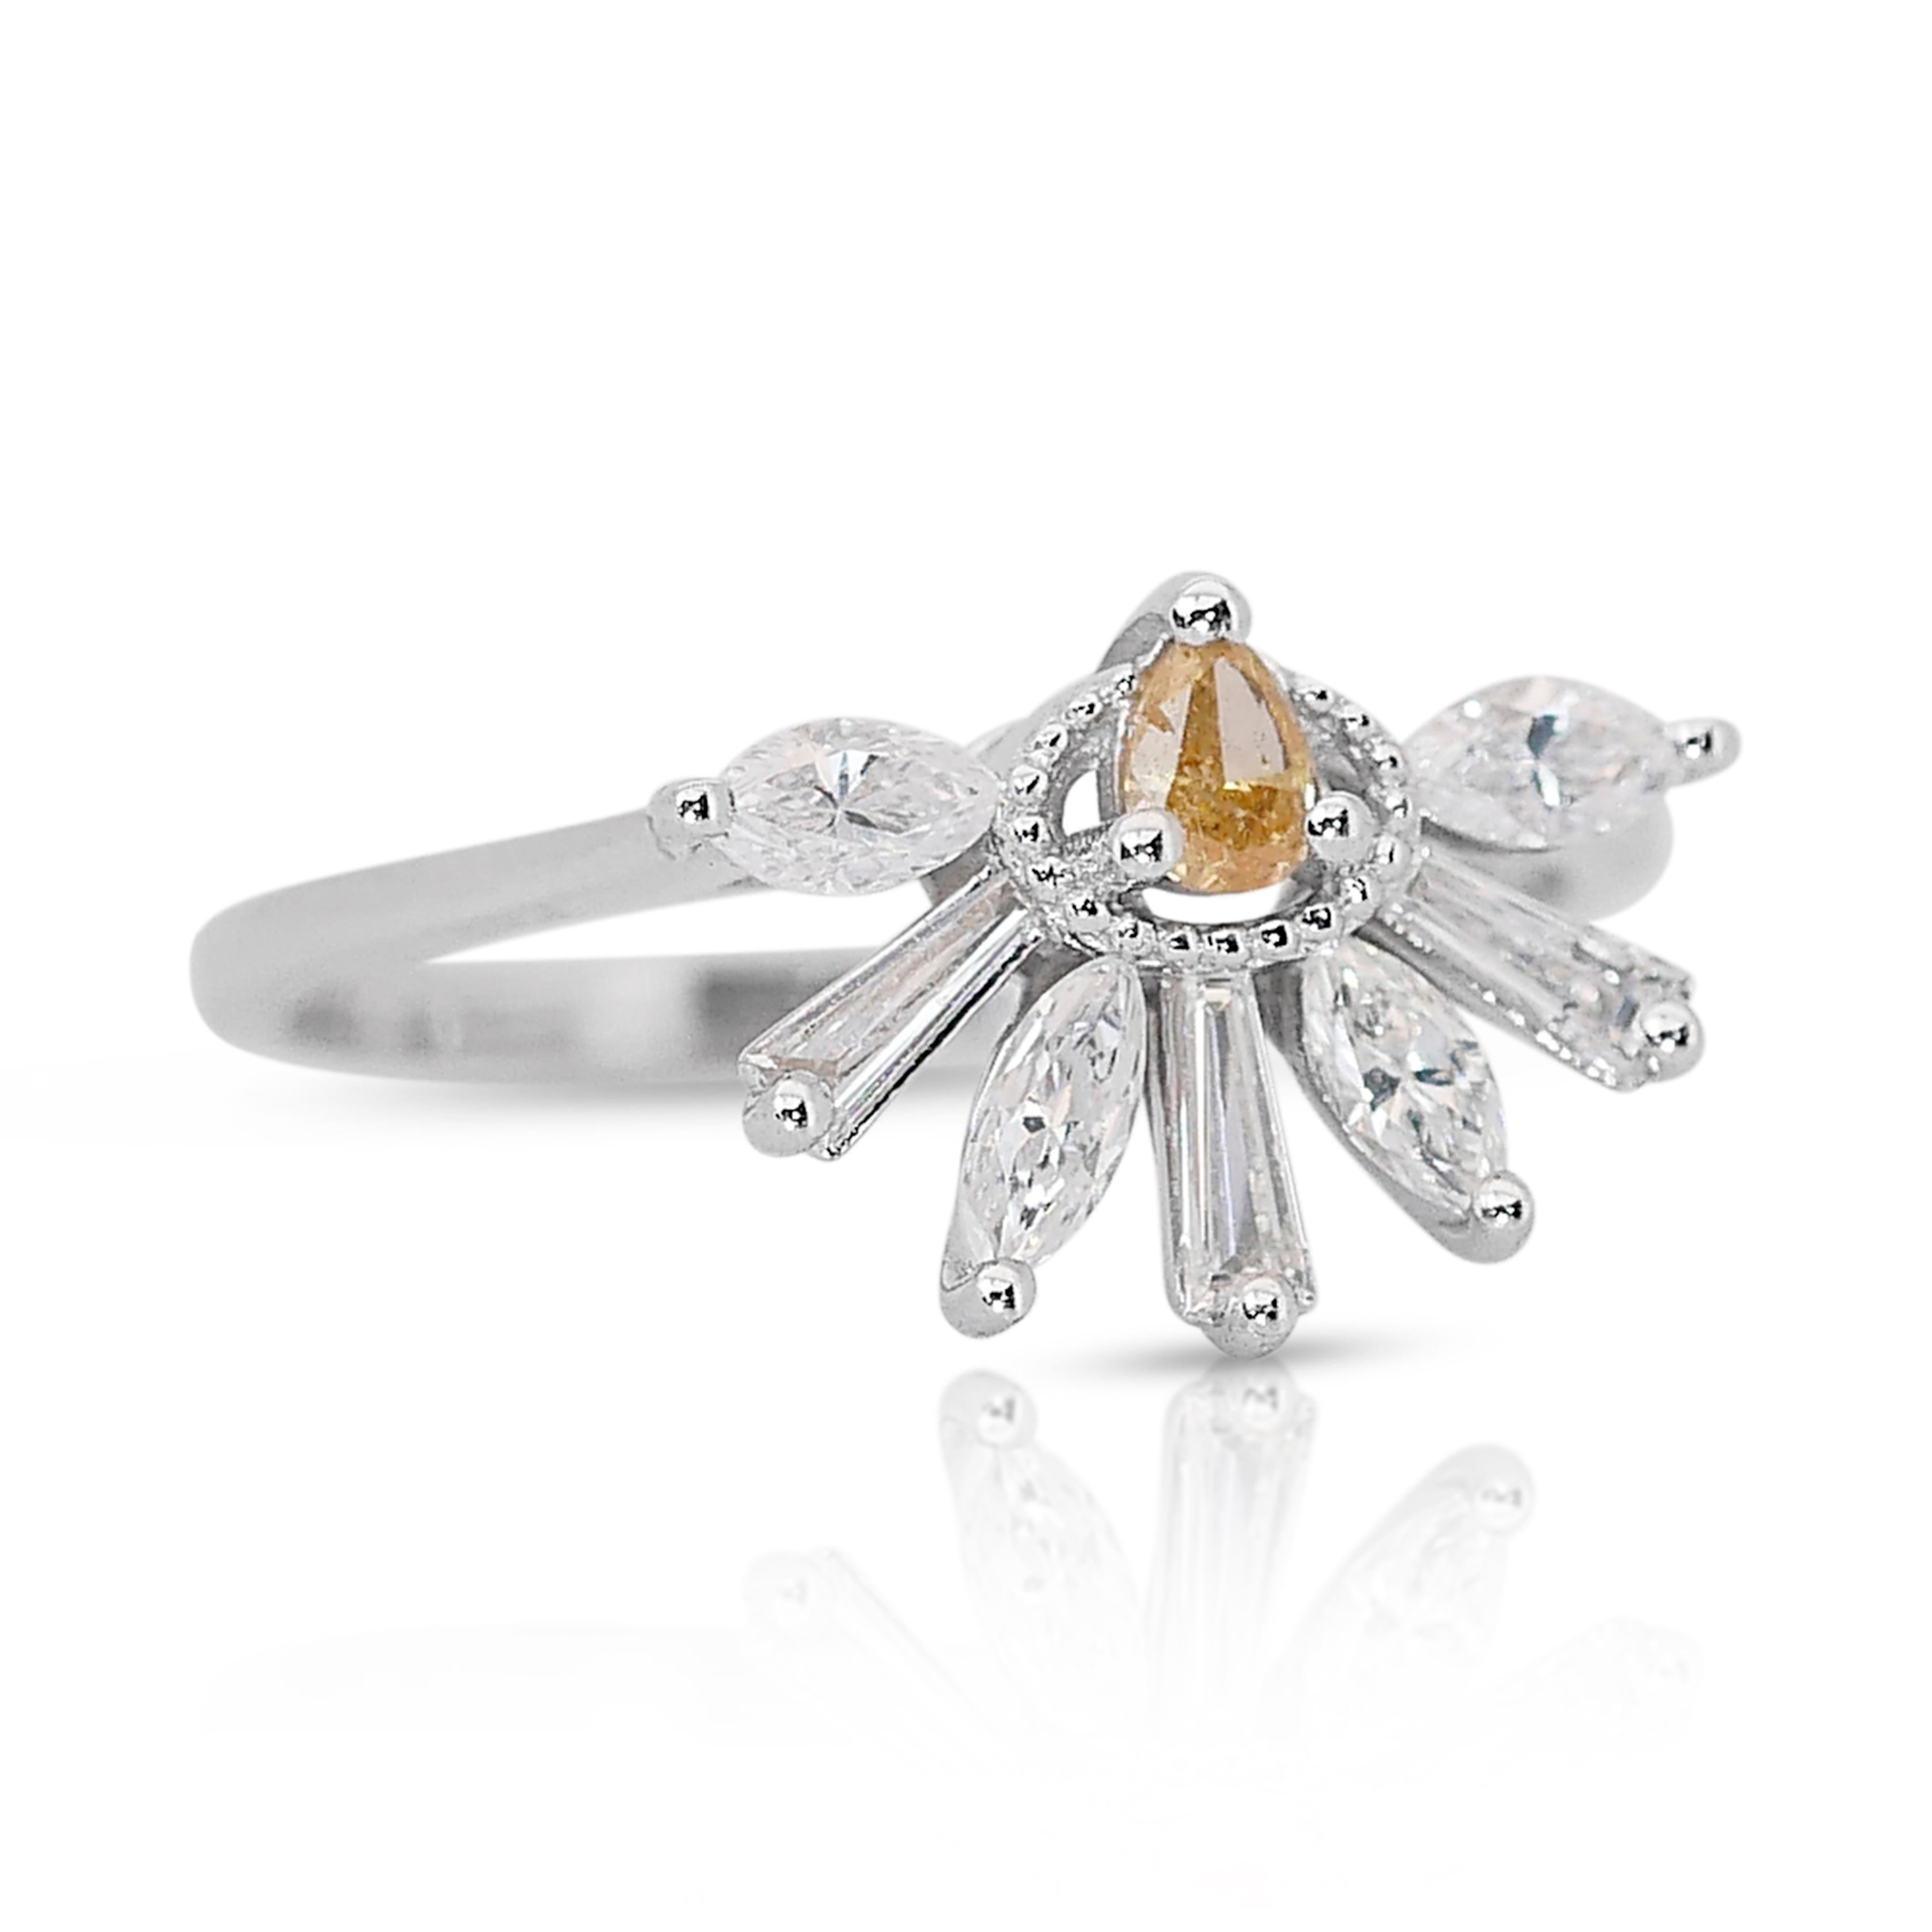 Unique and one of a kind art deco style Ring with  0.77 ct Diamonds Fancy-Colored Ring in 18k White Gold - IGI Certified

This exquisite 18k white gold fancy-colored ring showcases a vibrant 0.10-carat pear-shaped diamond, offering a unique and